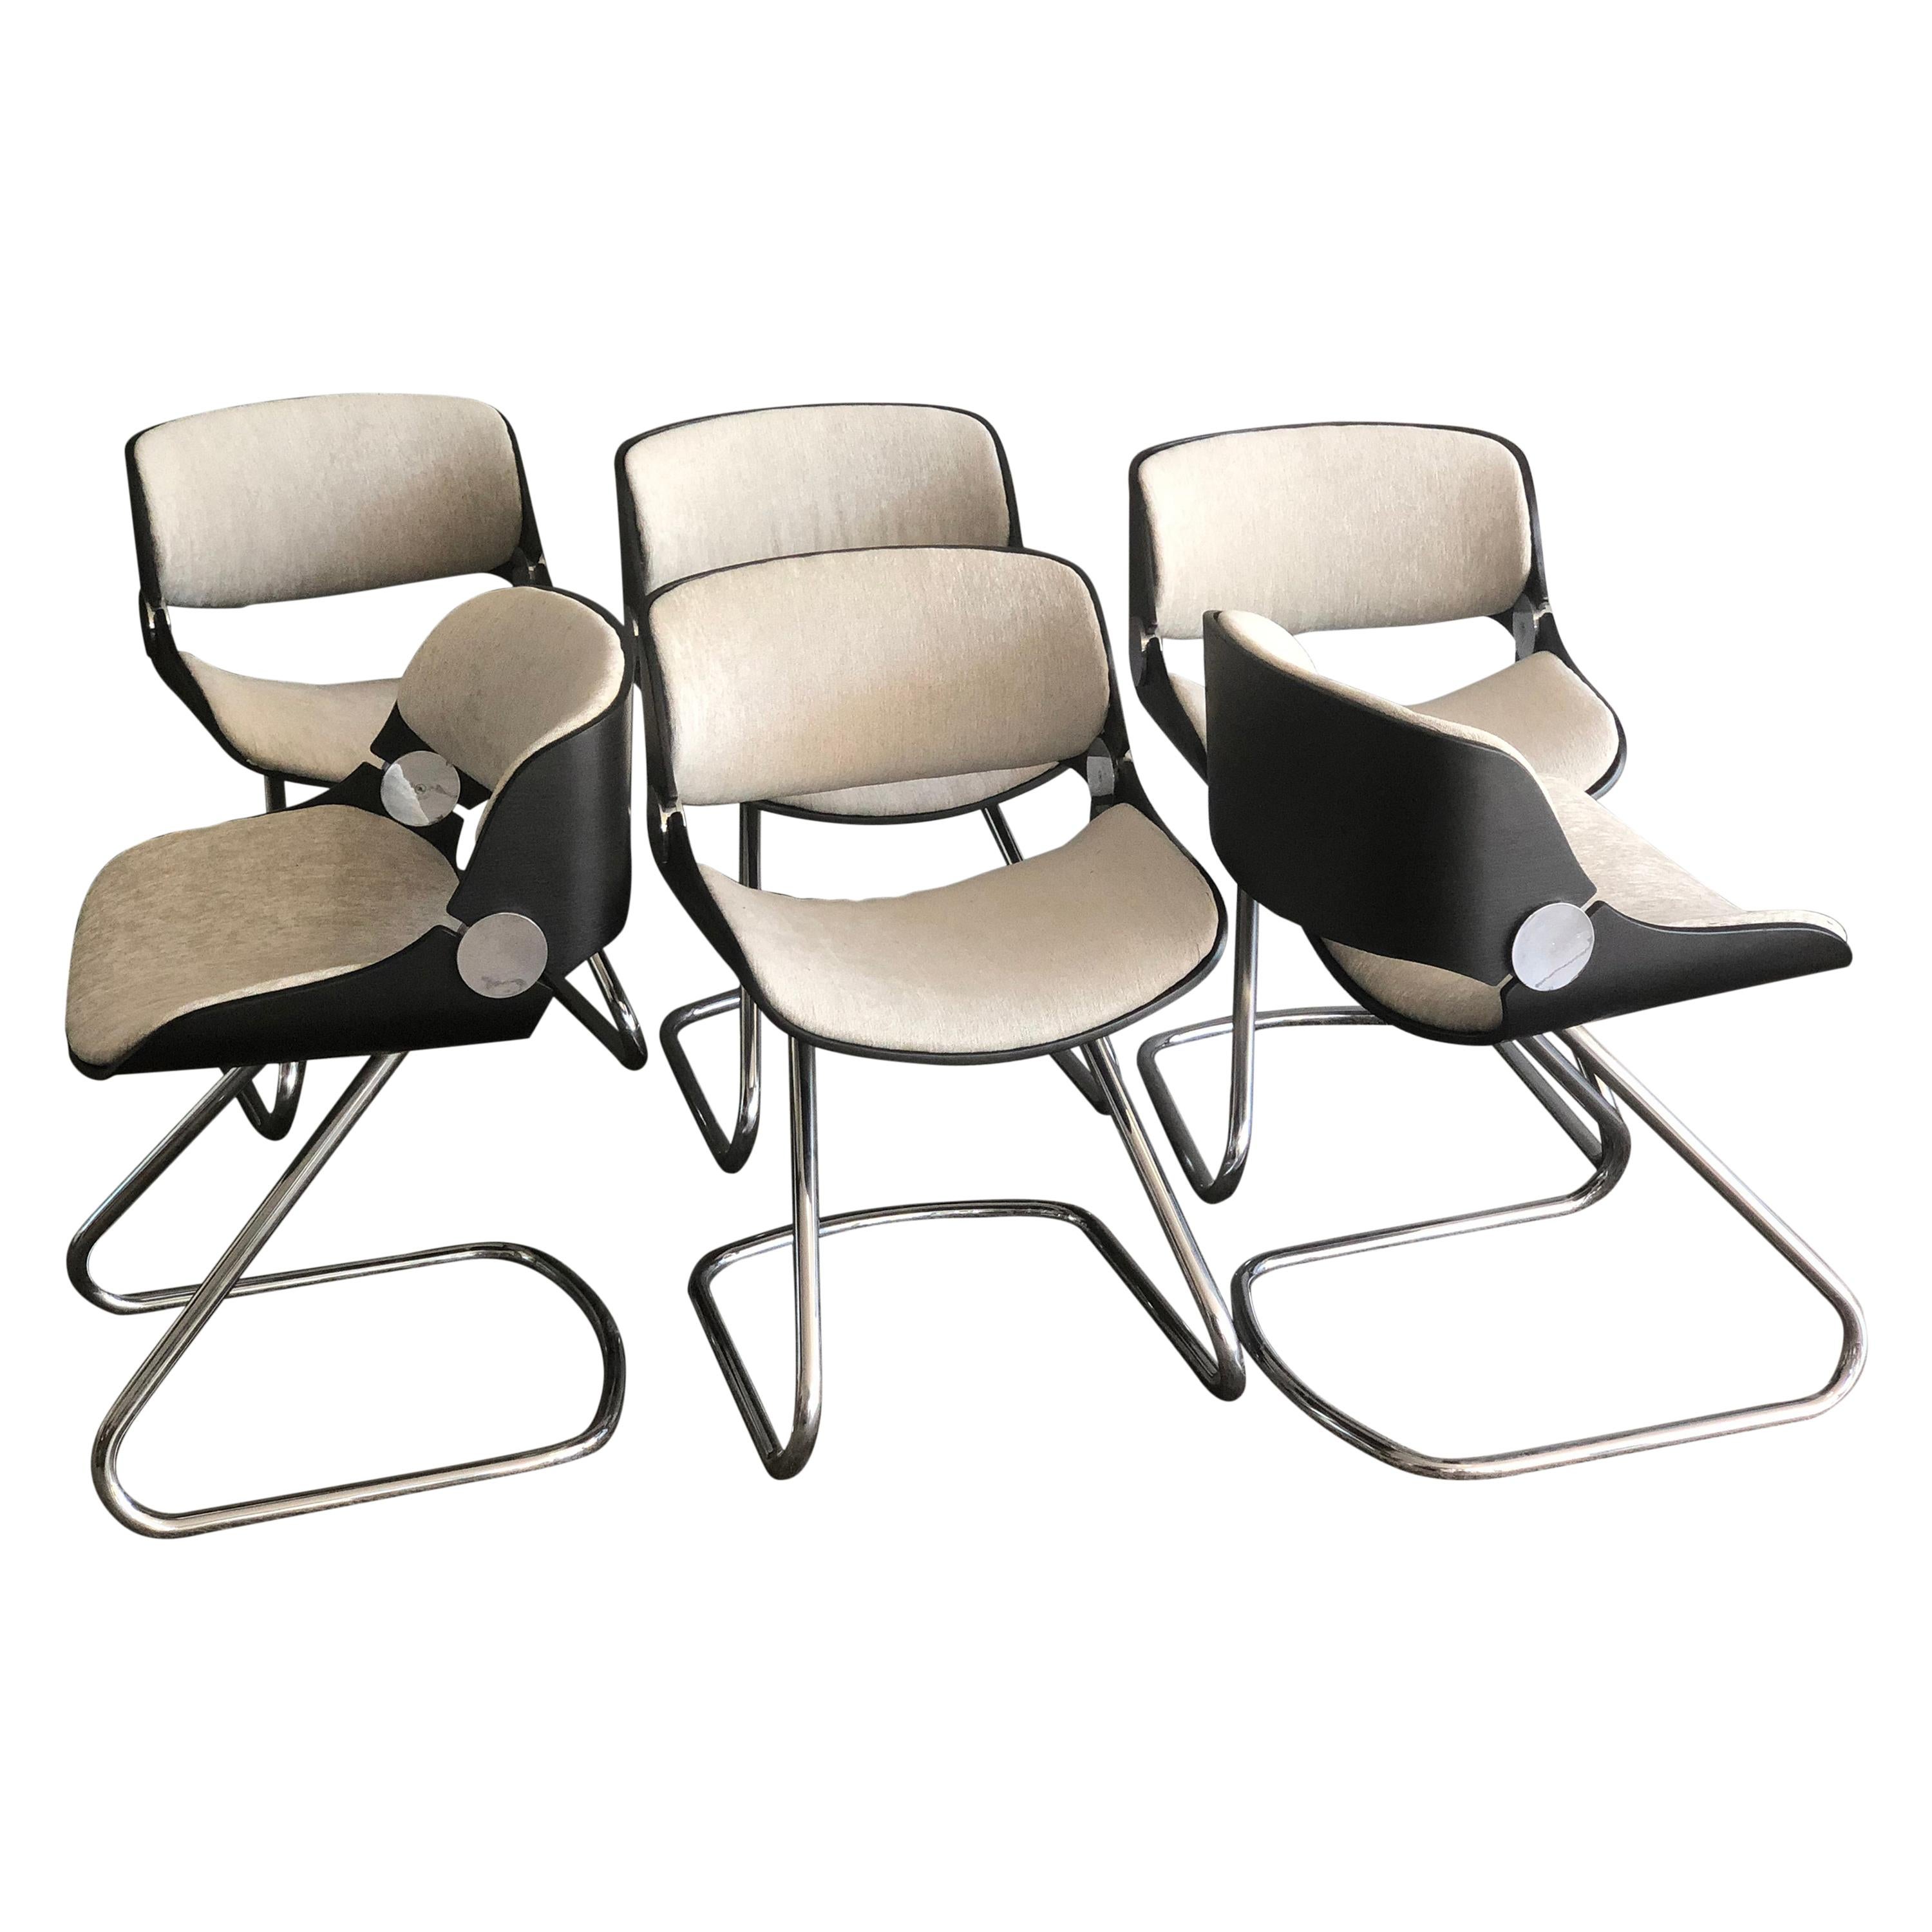 Set of 6 Etienne Fermigier Chairs Fully Restored, 1970 For Sale